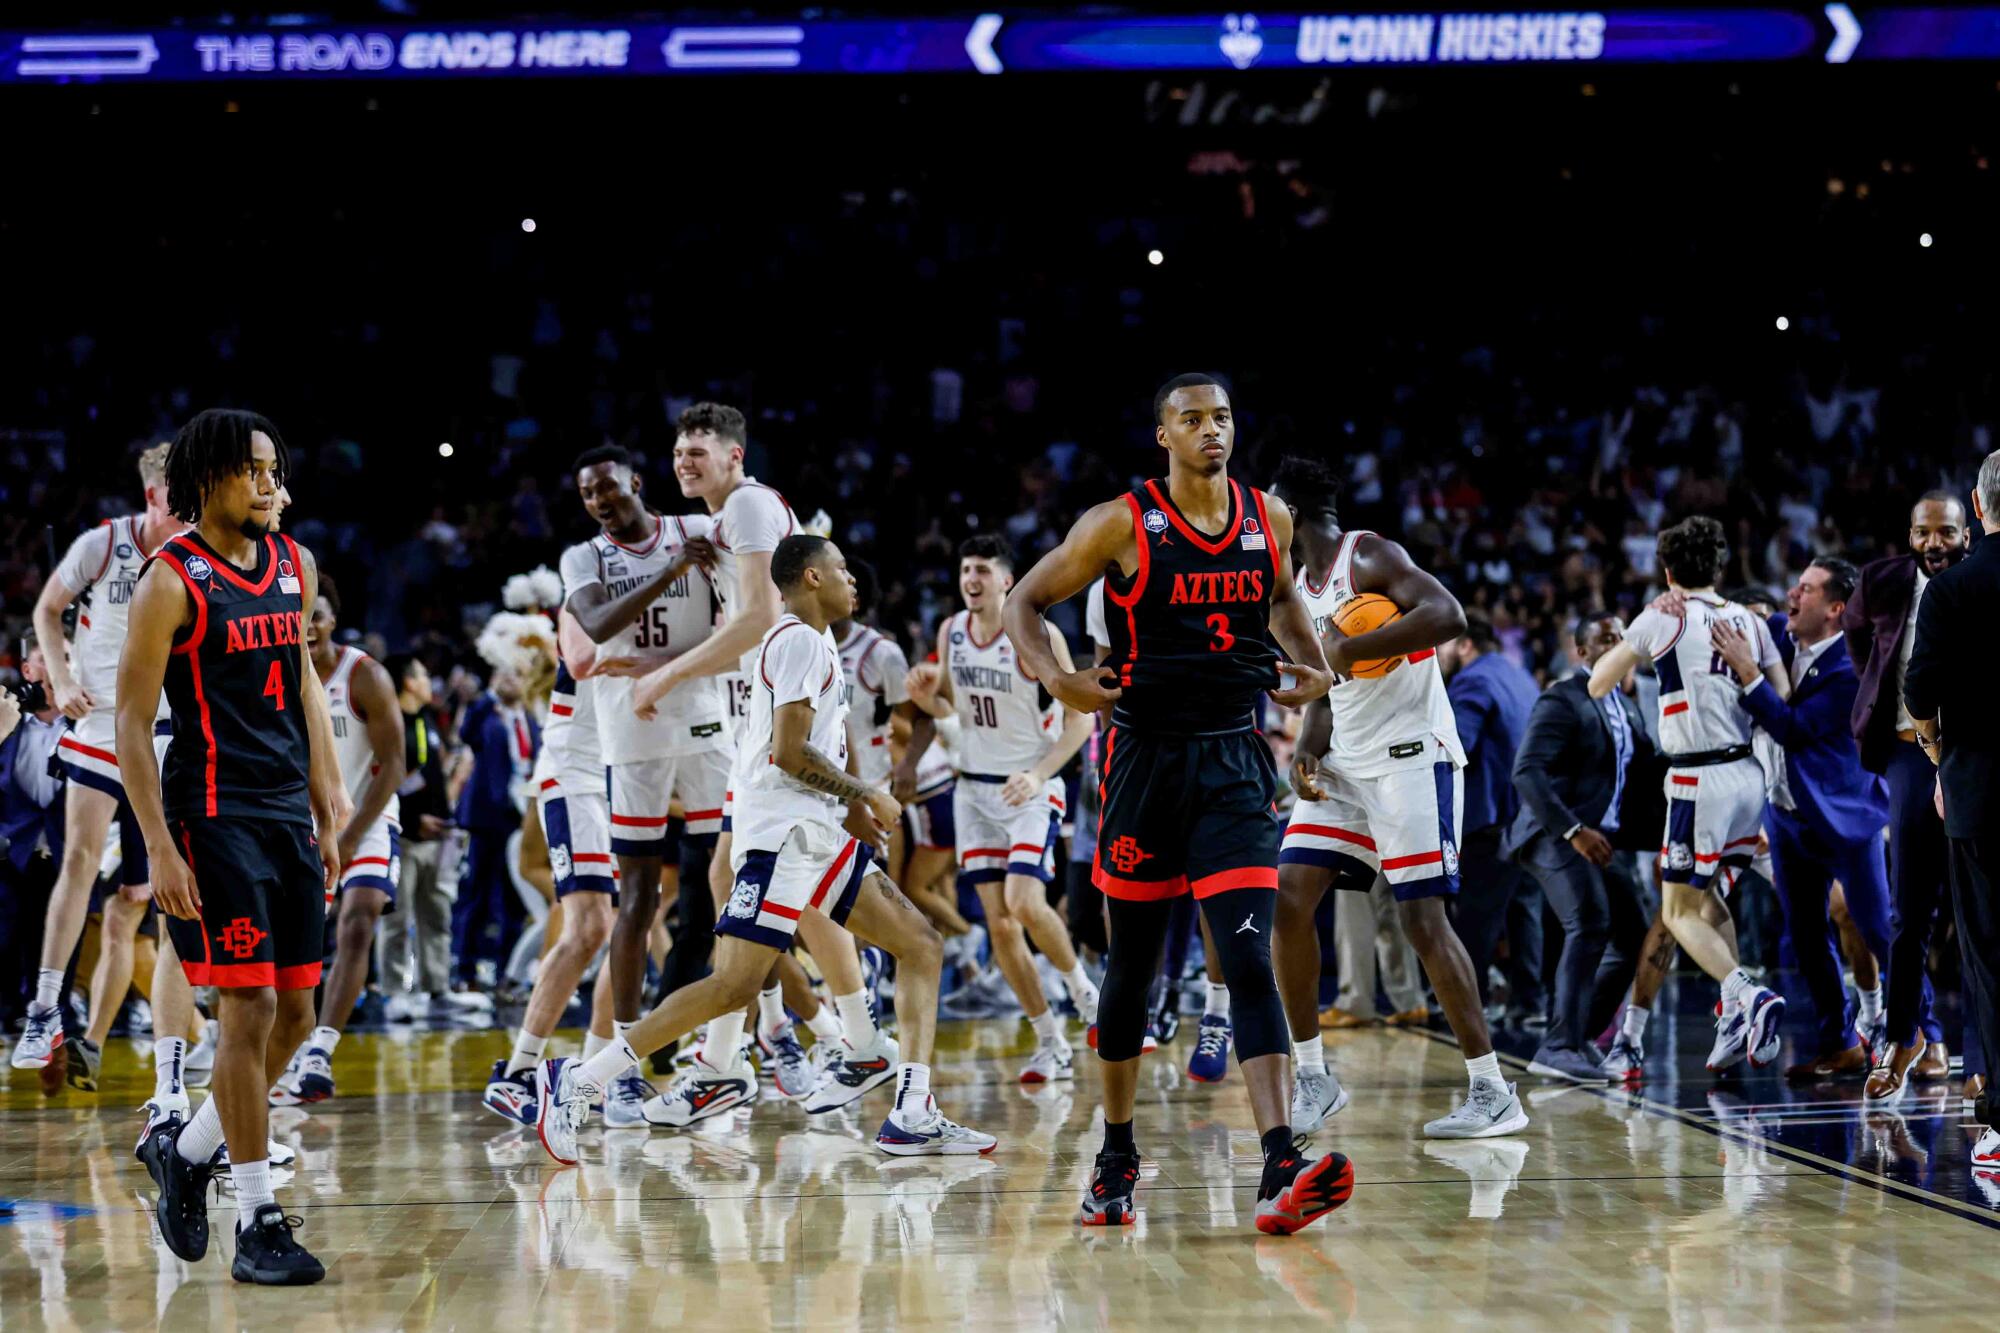 We put our name on the map': Aztecs shoot the moon, but fall short in  national championship game - The San Diego Union-Tribune